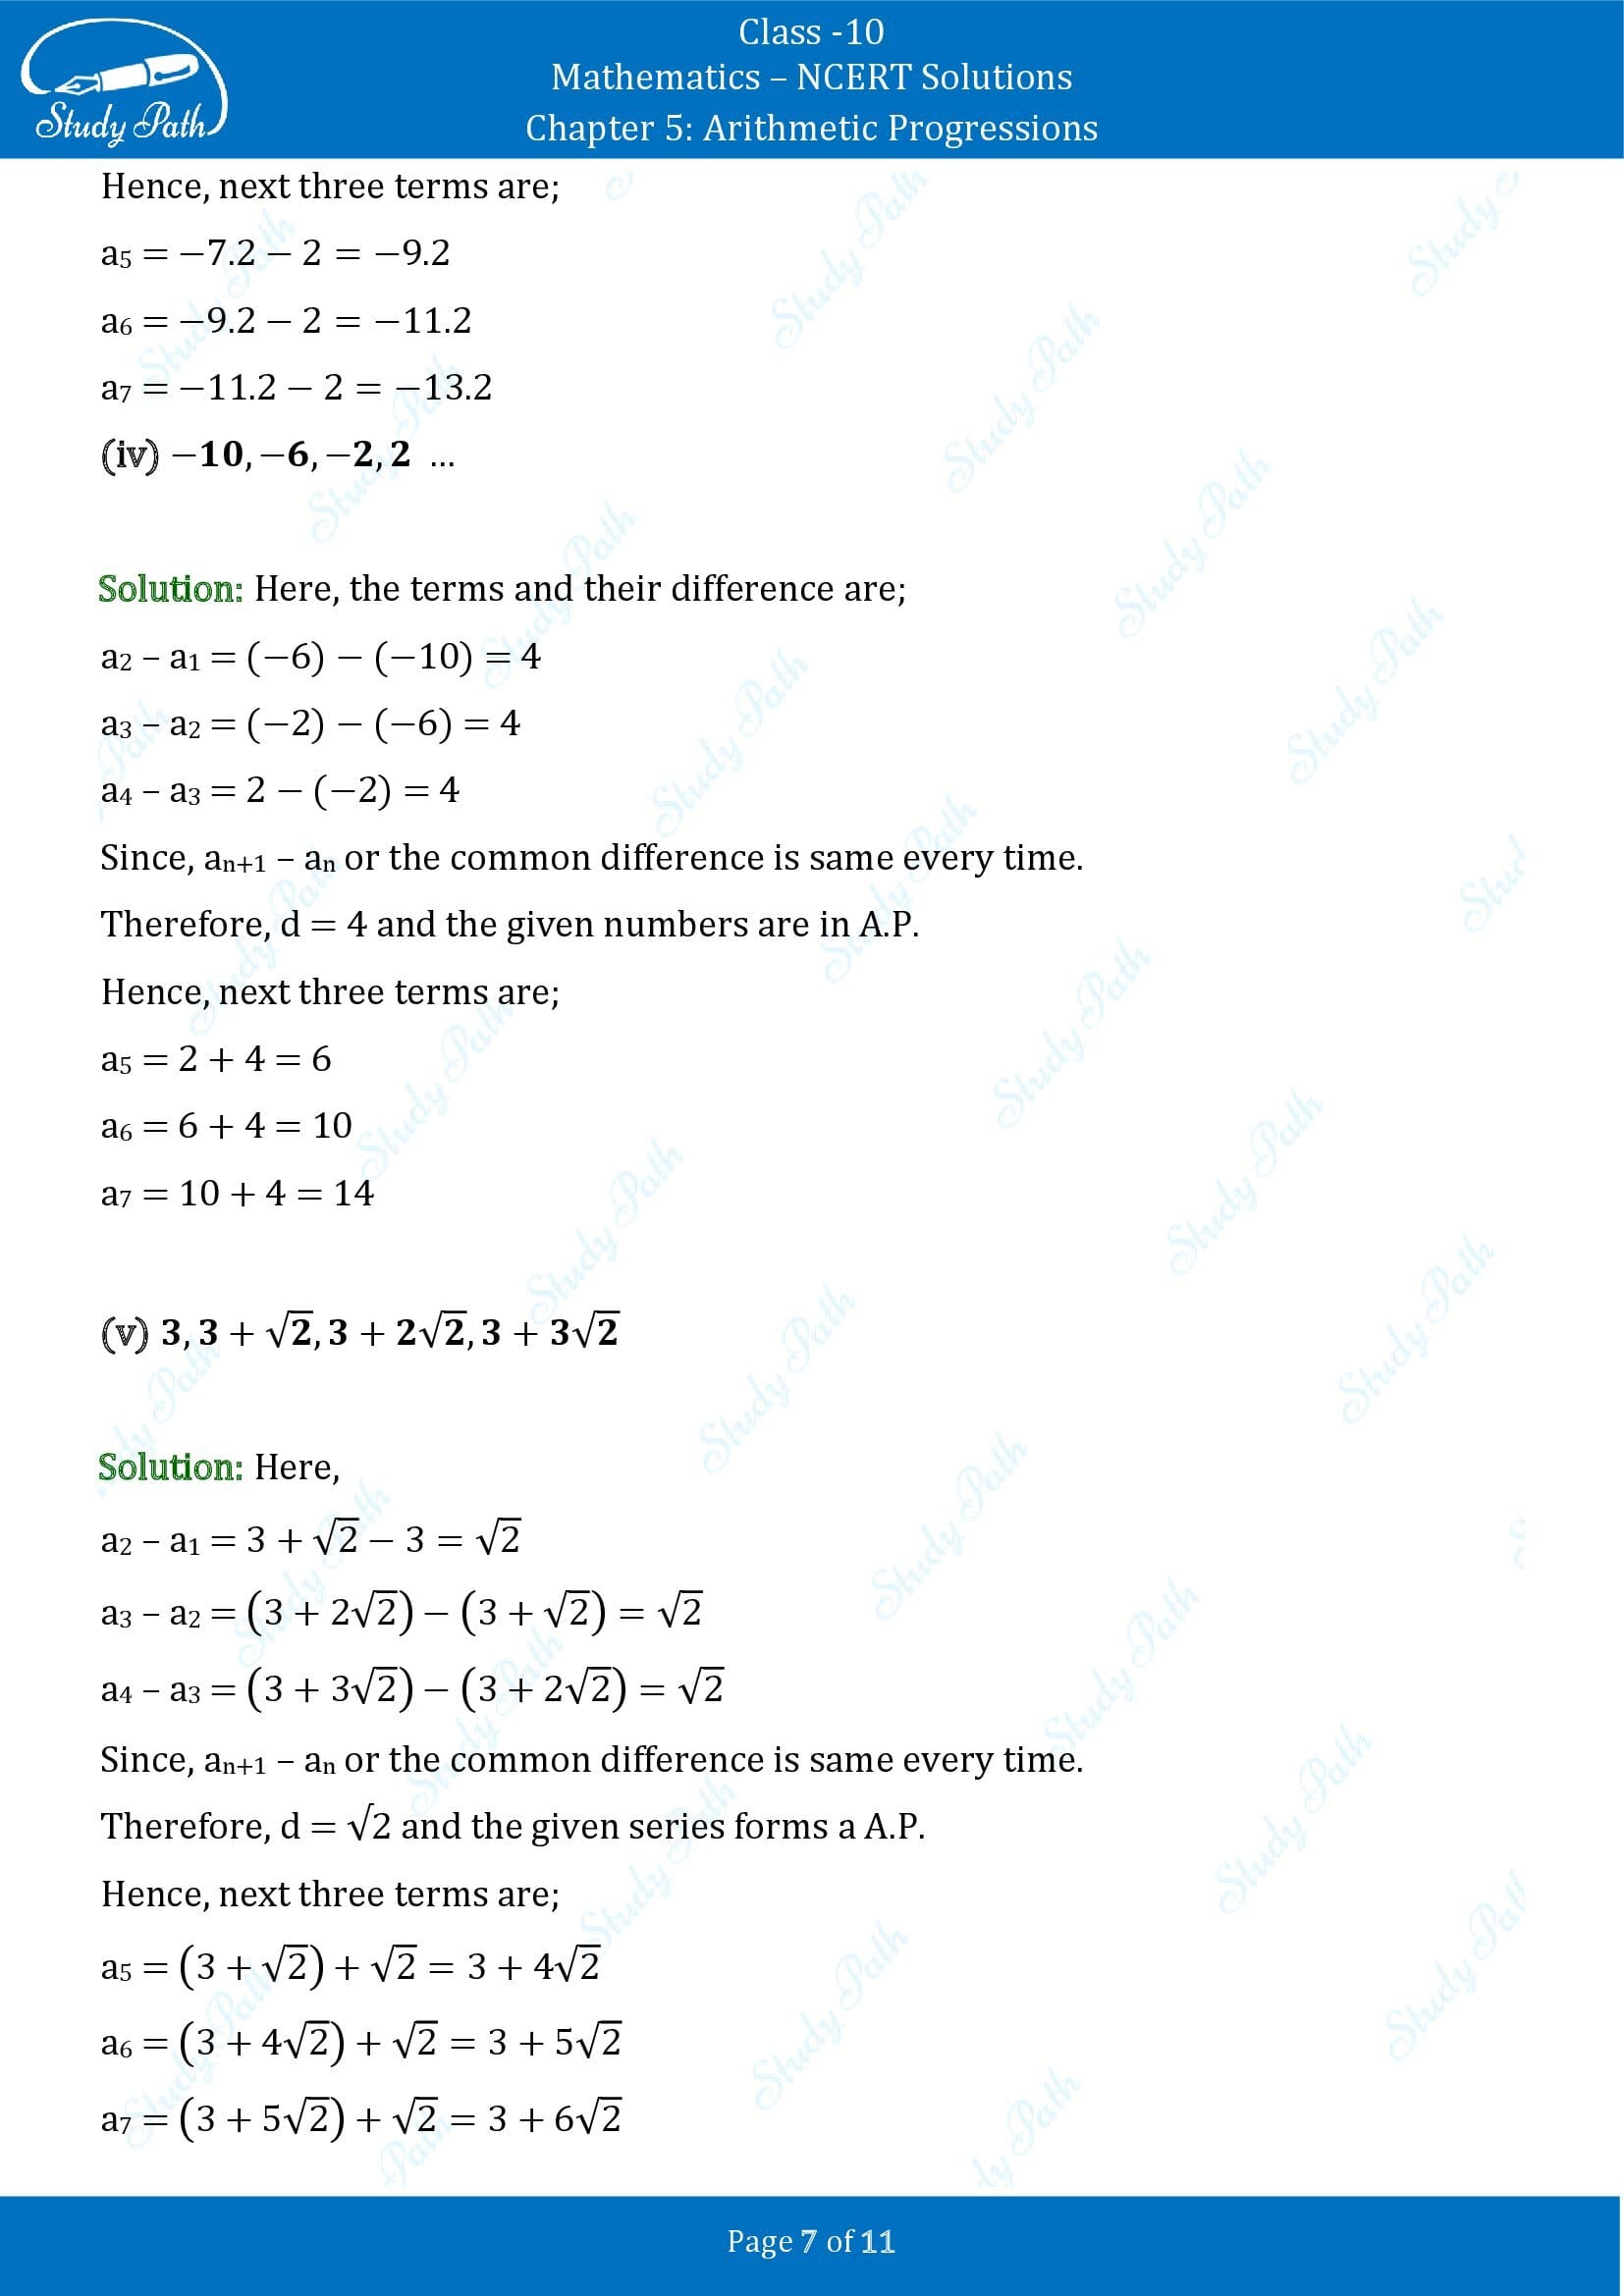 NCERT Solutions for Class 10 Maths Chapter 5 Arithmetic Progressions Exercise 5.1 00007